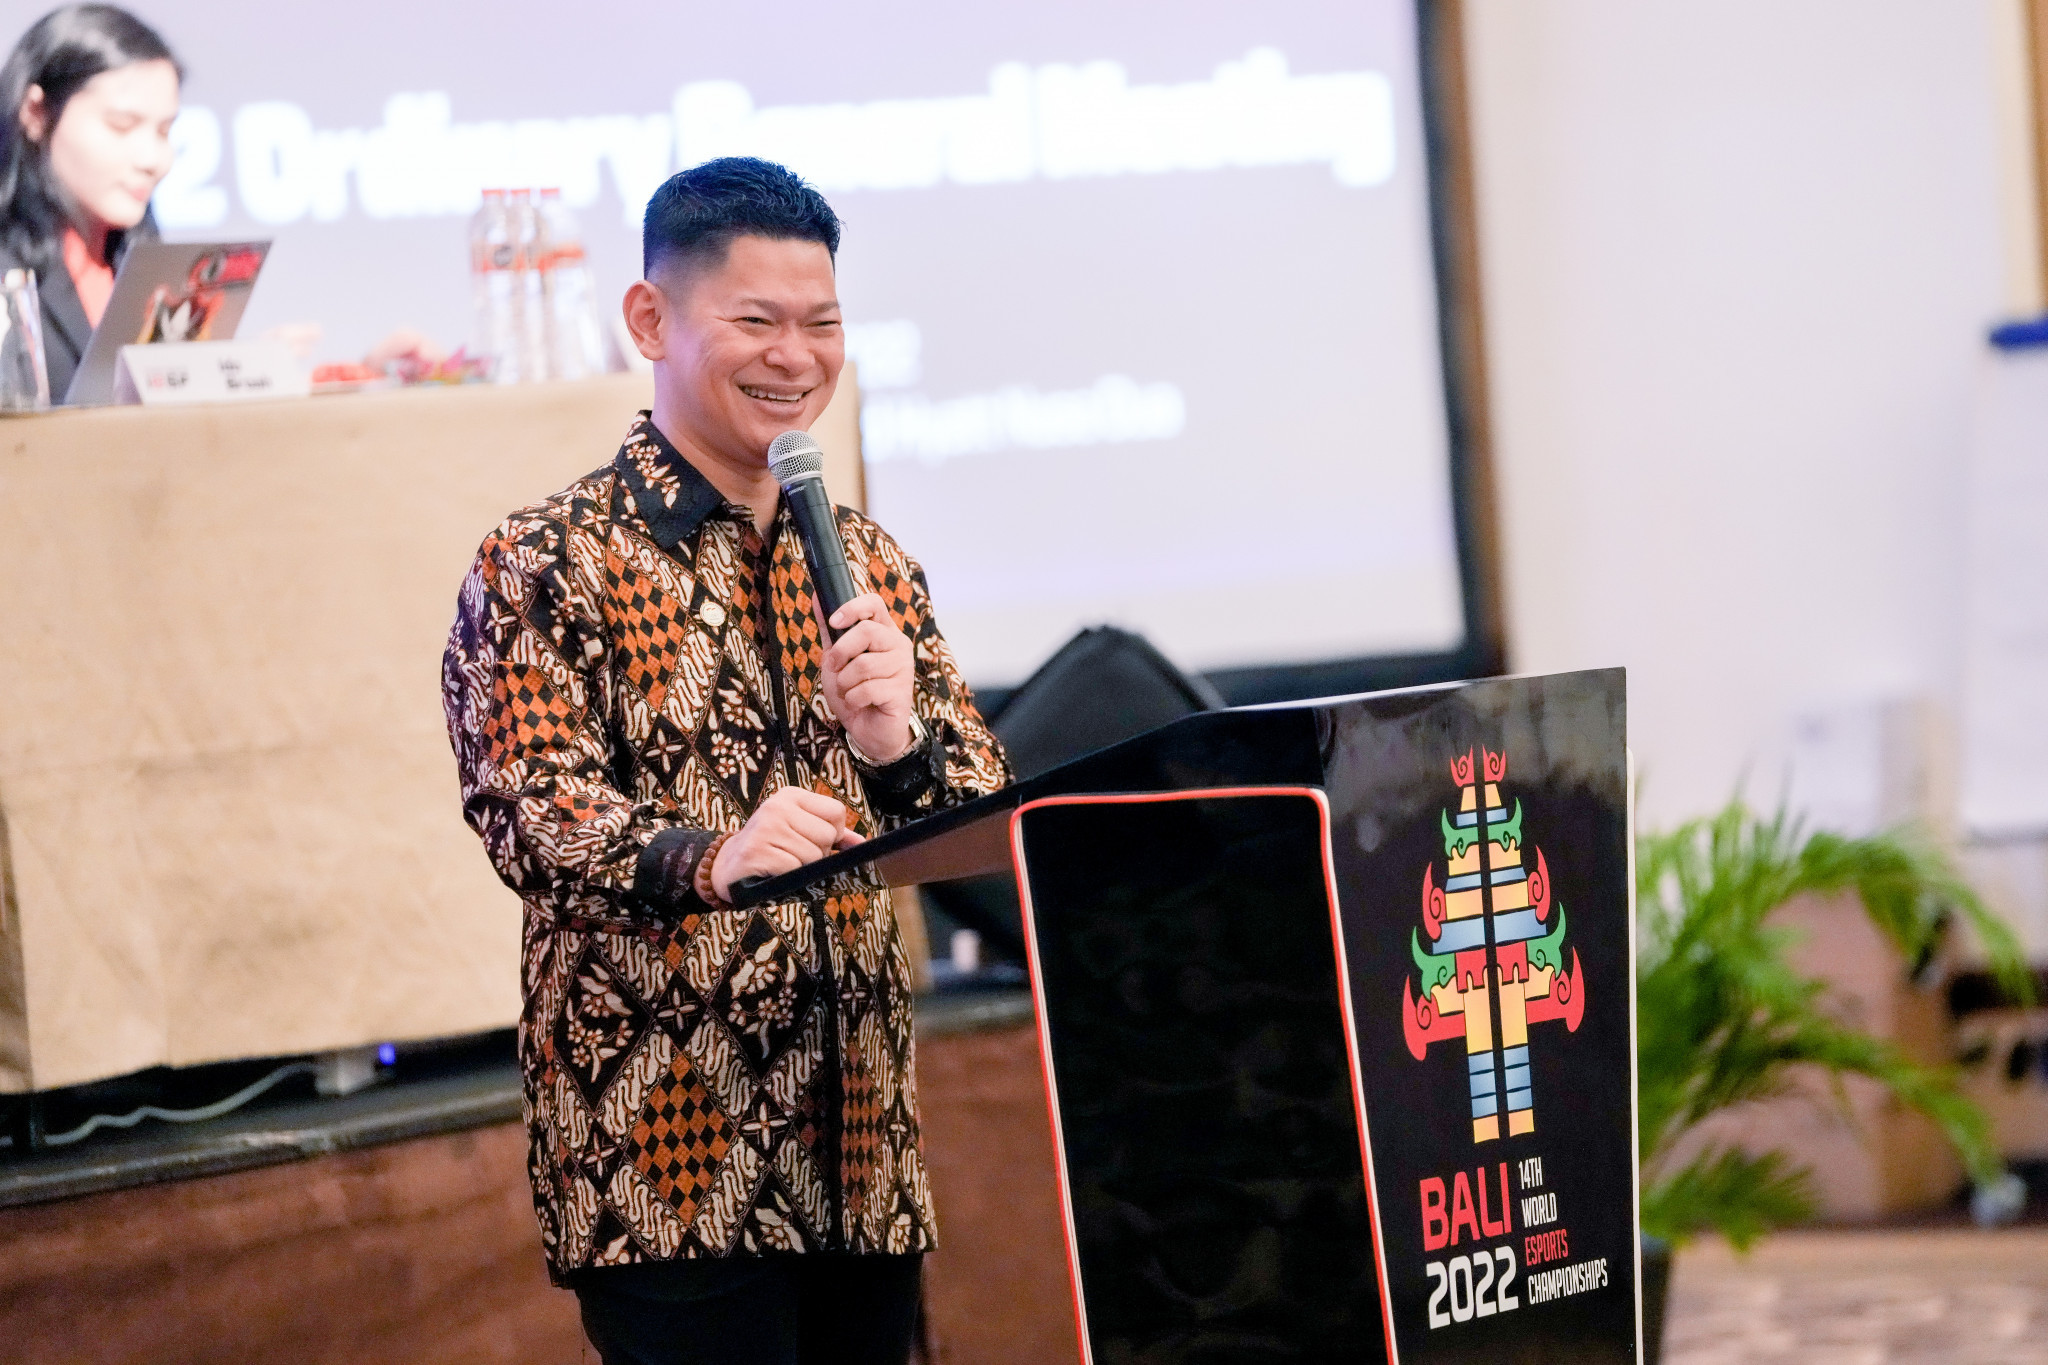 Indonesia is hosting the IESF World Esports Championships and General Meeting, so Indonesian Olympic Committee President Raja Sapta Oktohari was among the speakers ©IESF